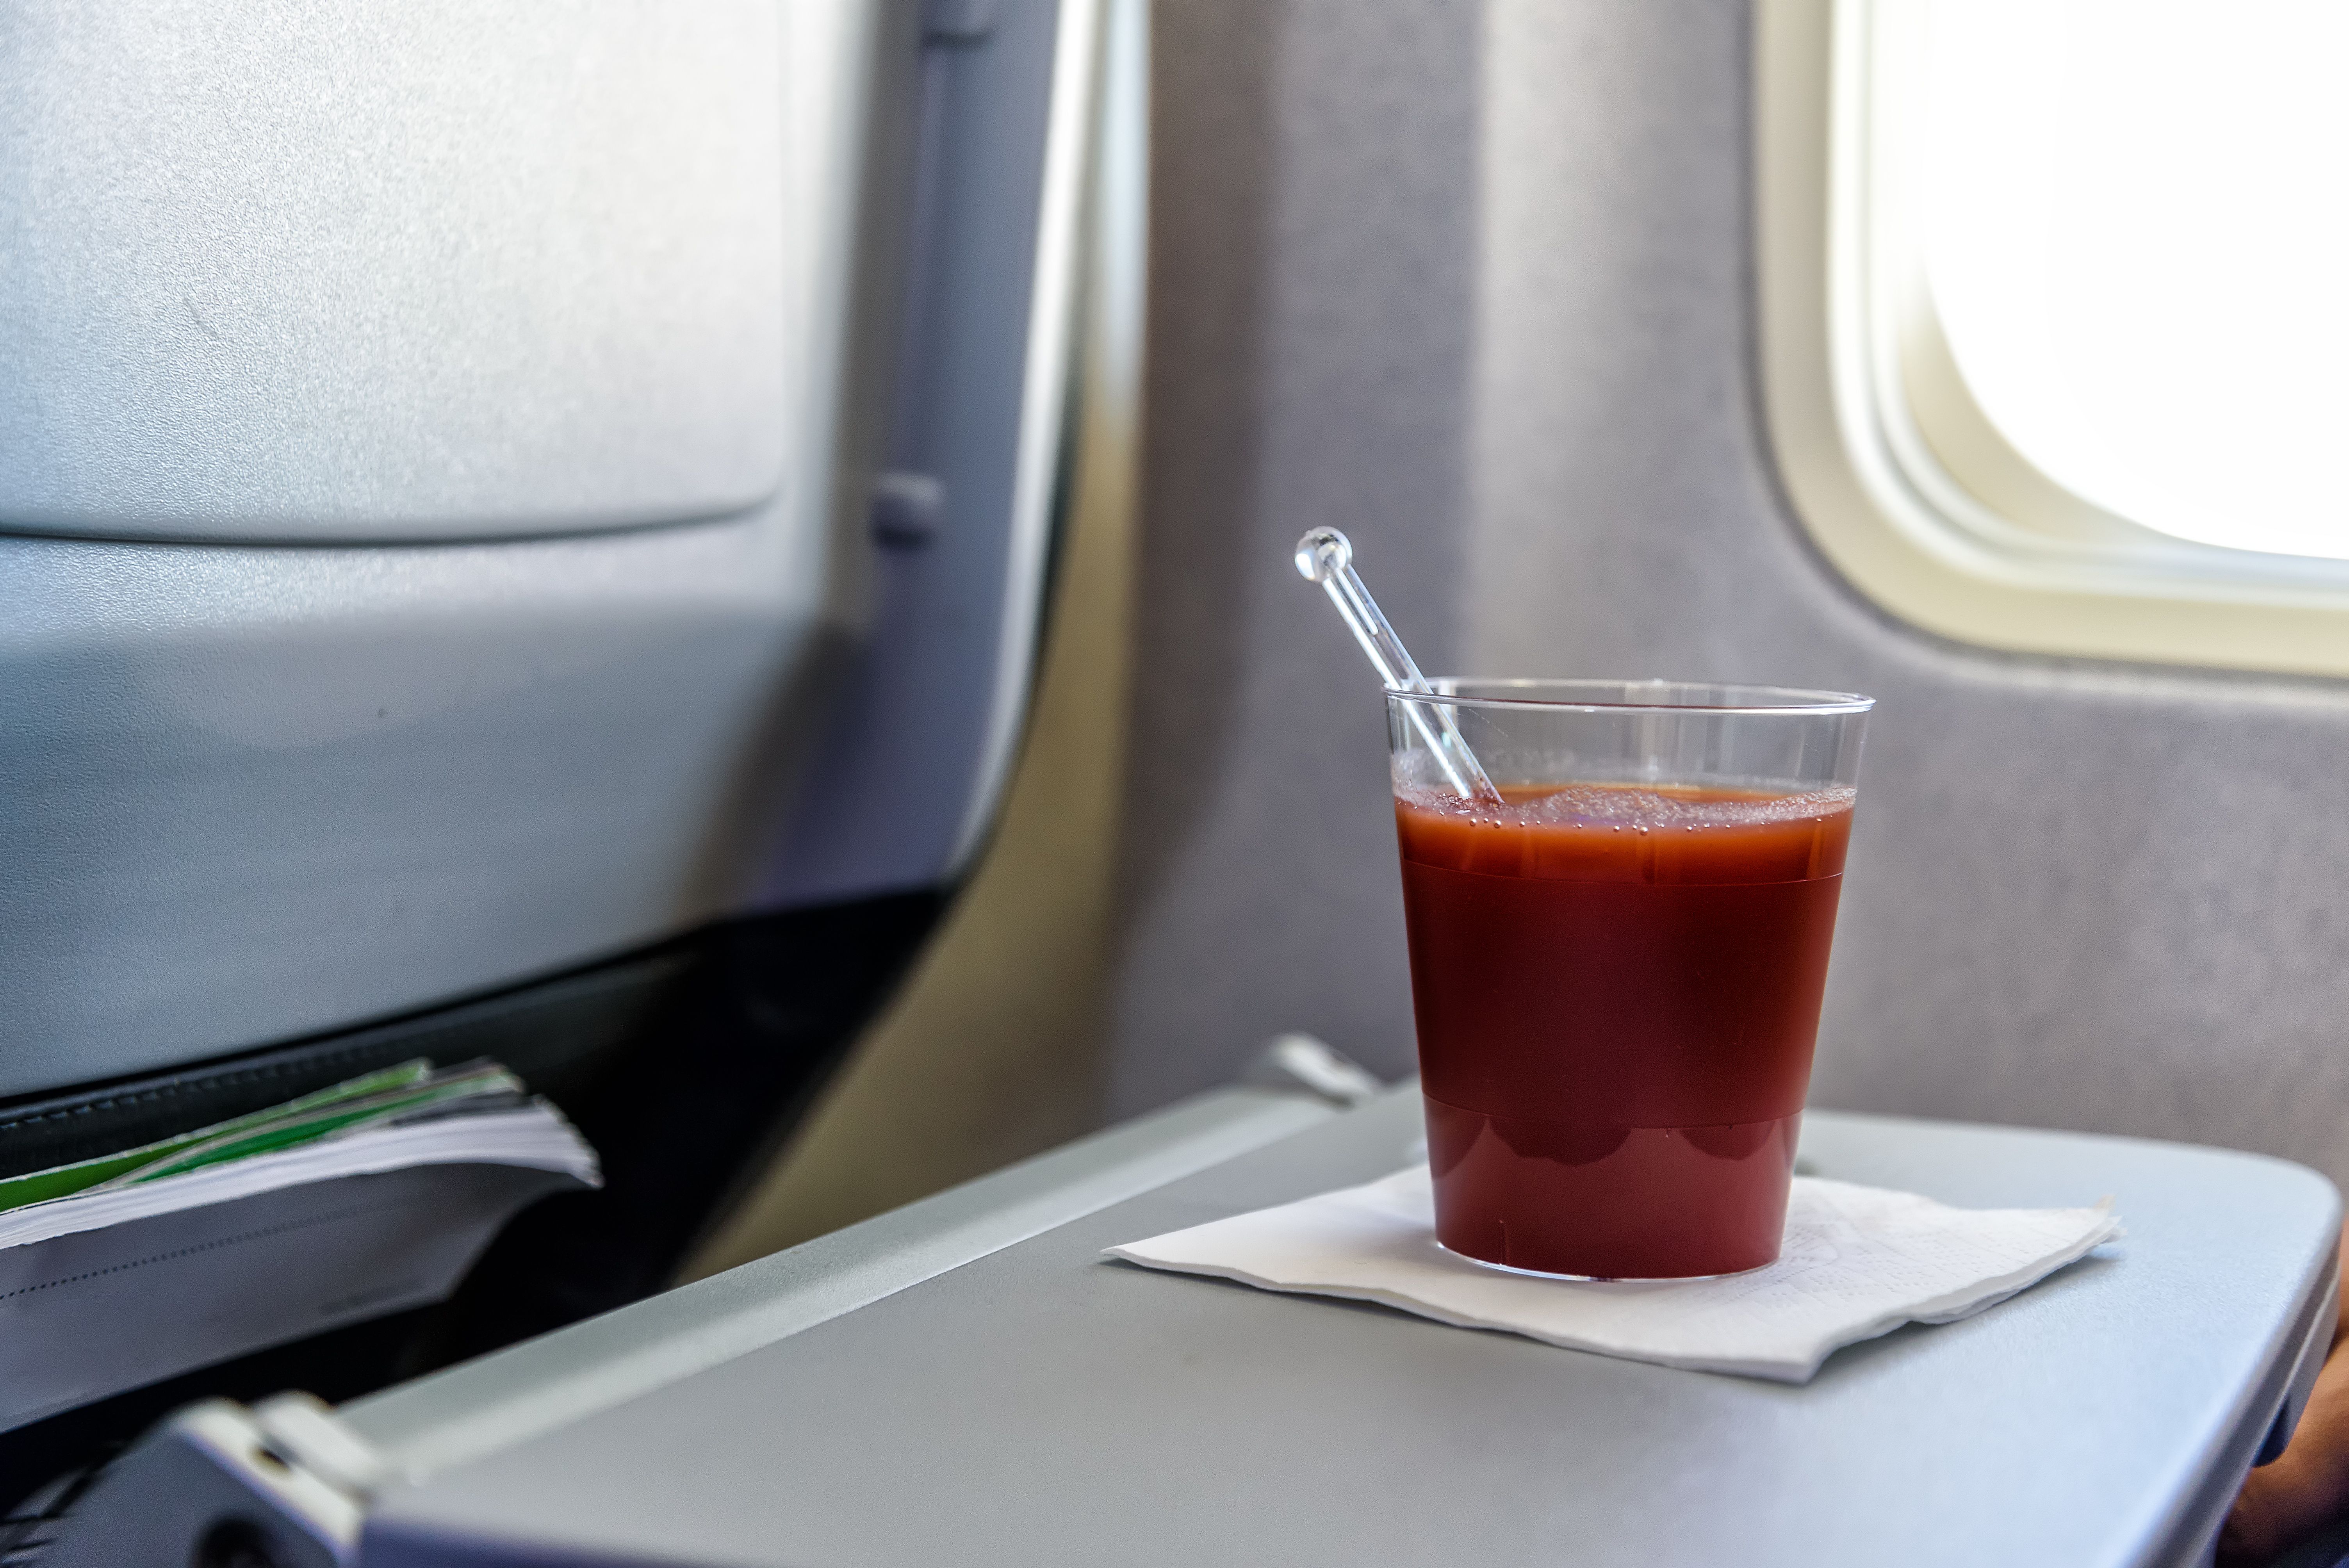 A glass of tomato juice on a seatback tray table.